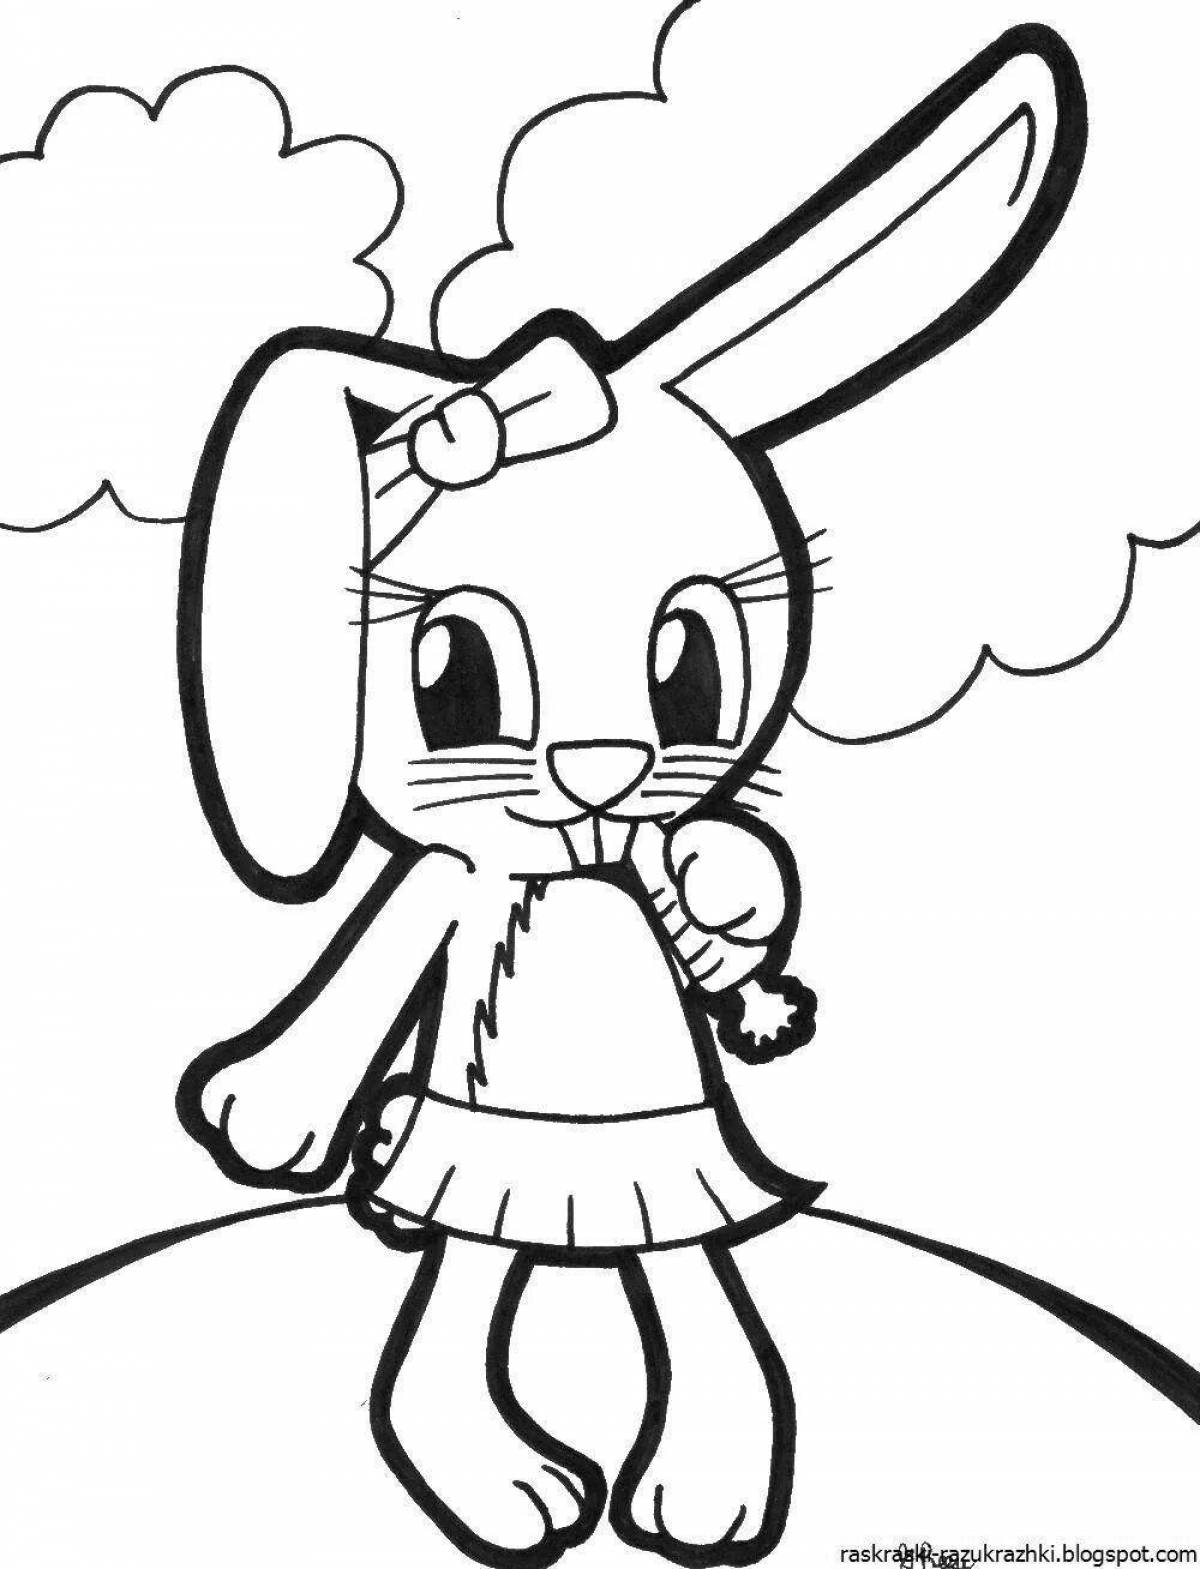 Coloring book sunny cat and rabbit